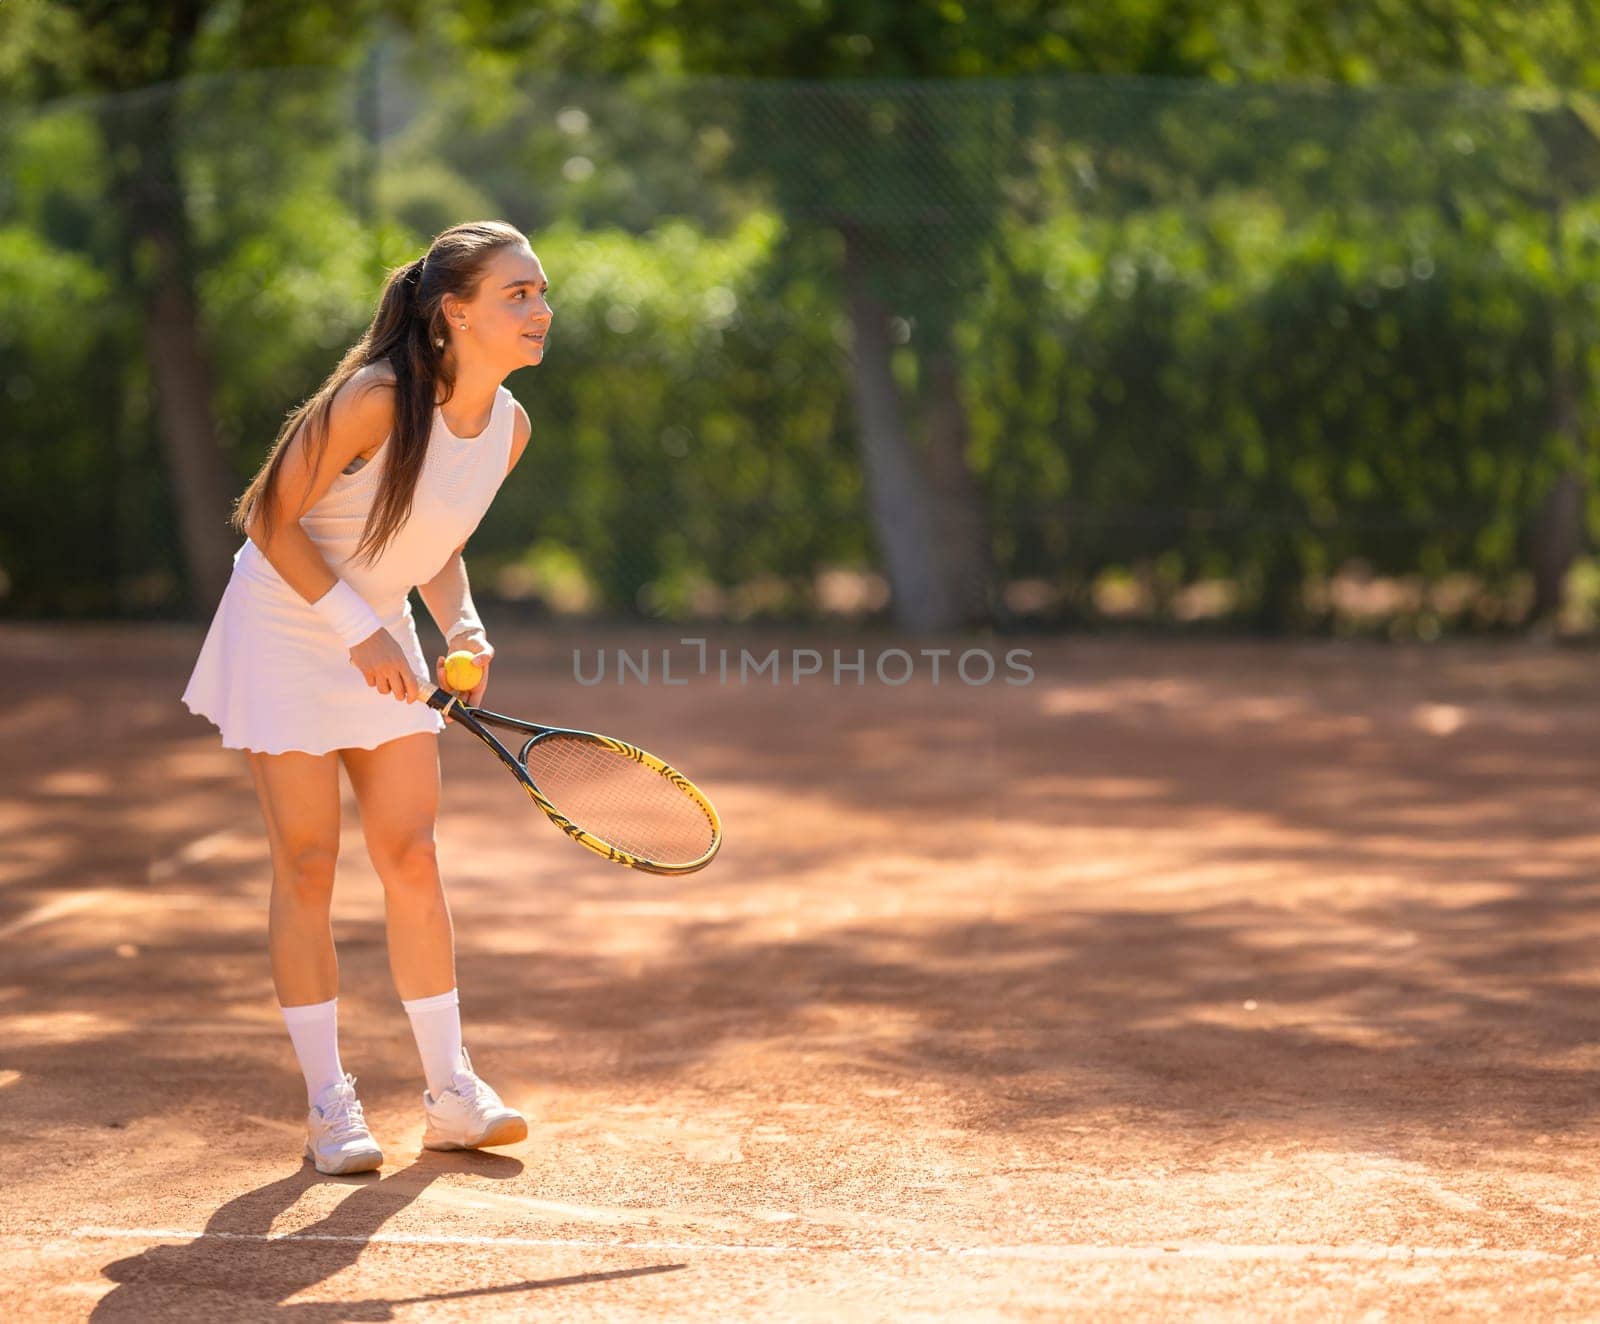 A woman is playing tennis on a clay court. She is wearing a white dress and a white tennis skirt